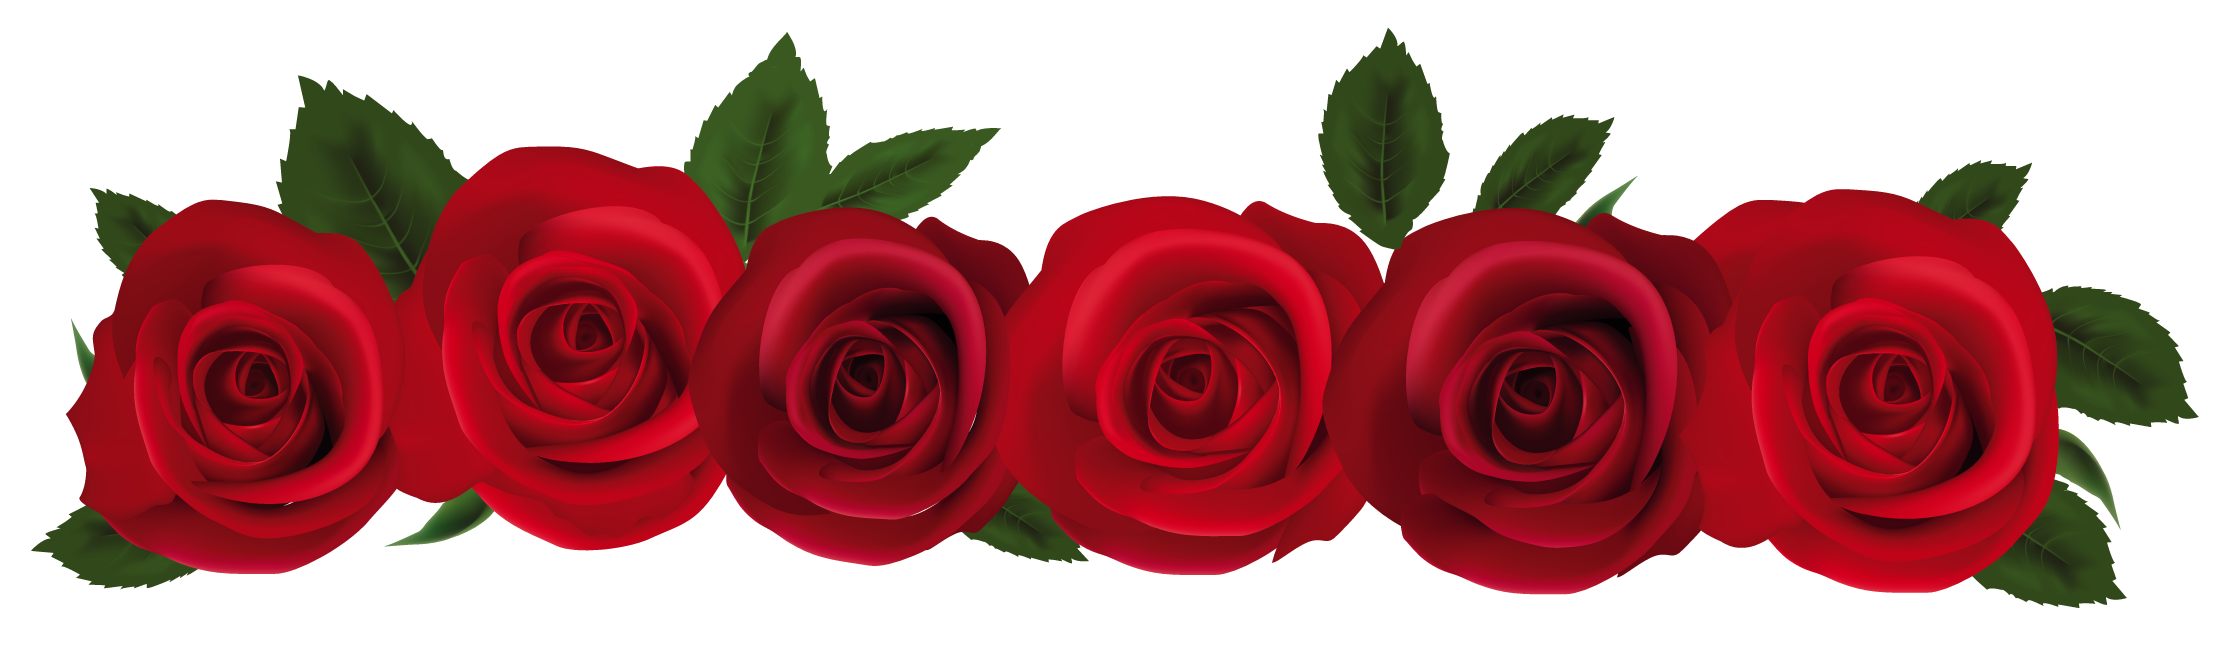 clipart red roses border - photo #10